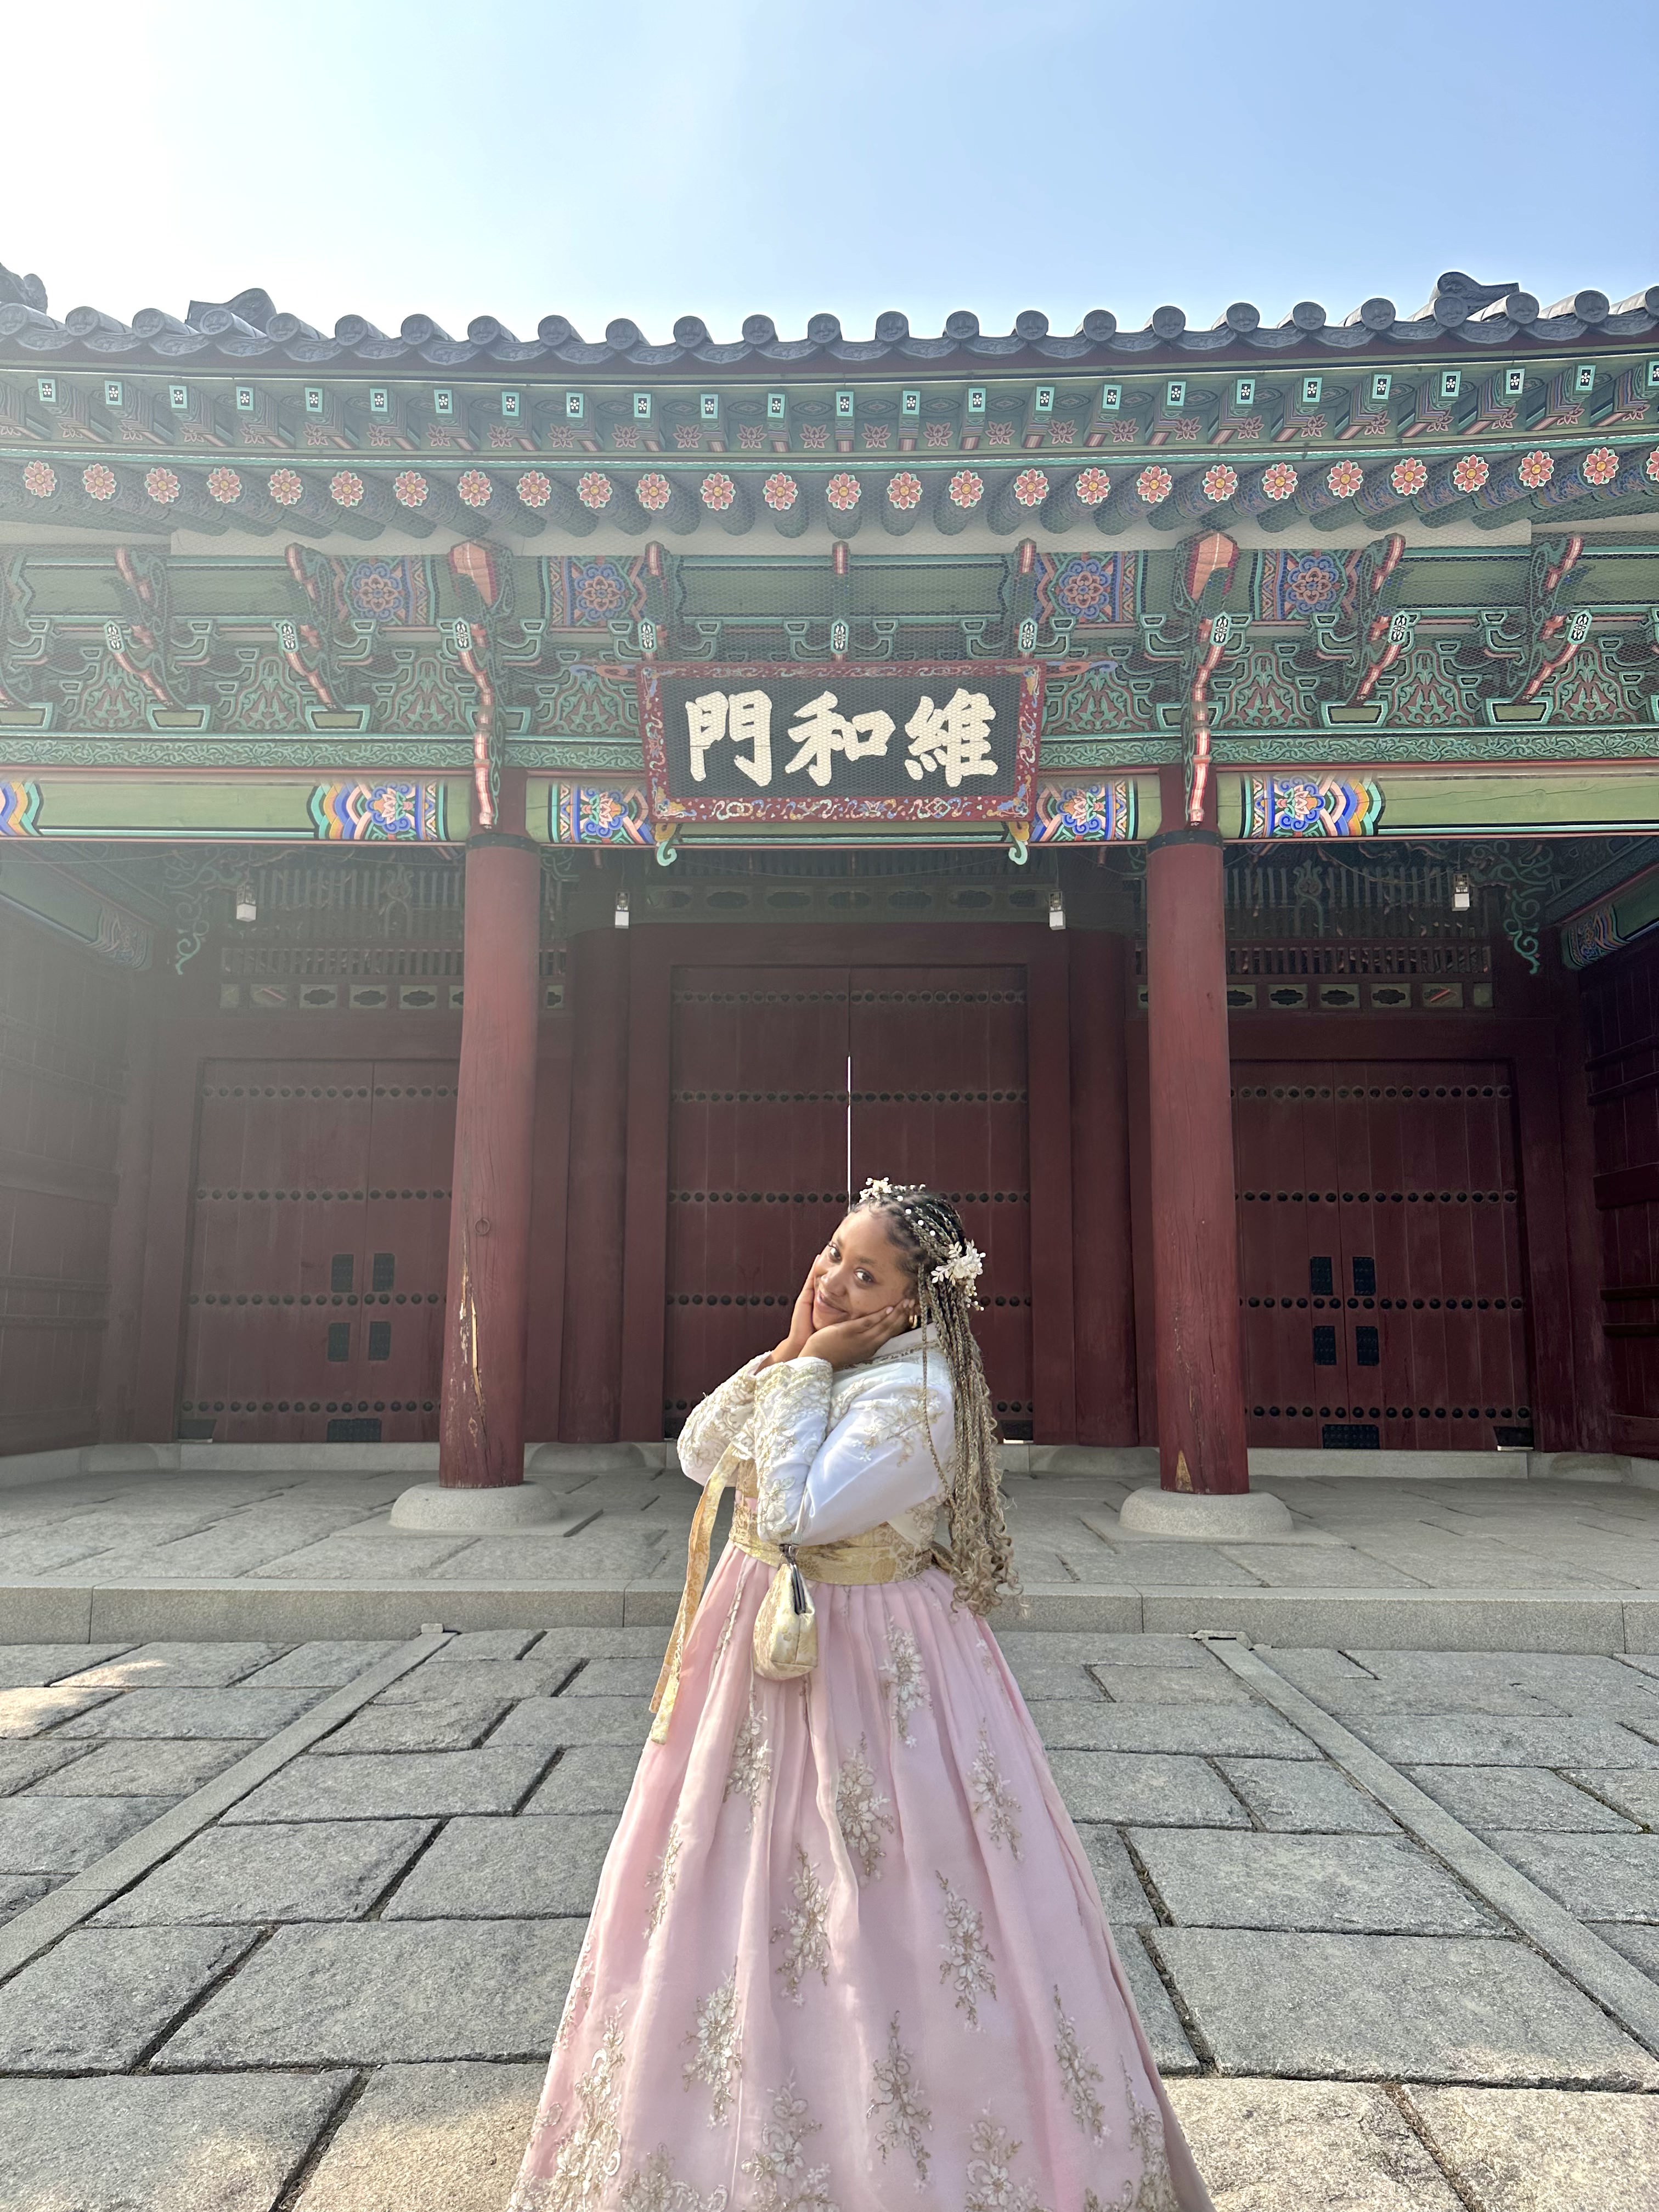 Floriesha standing in front of a Korean building in traditional clothing (a pink dress with gold detailing).